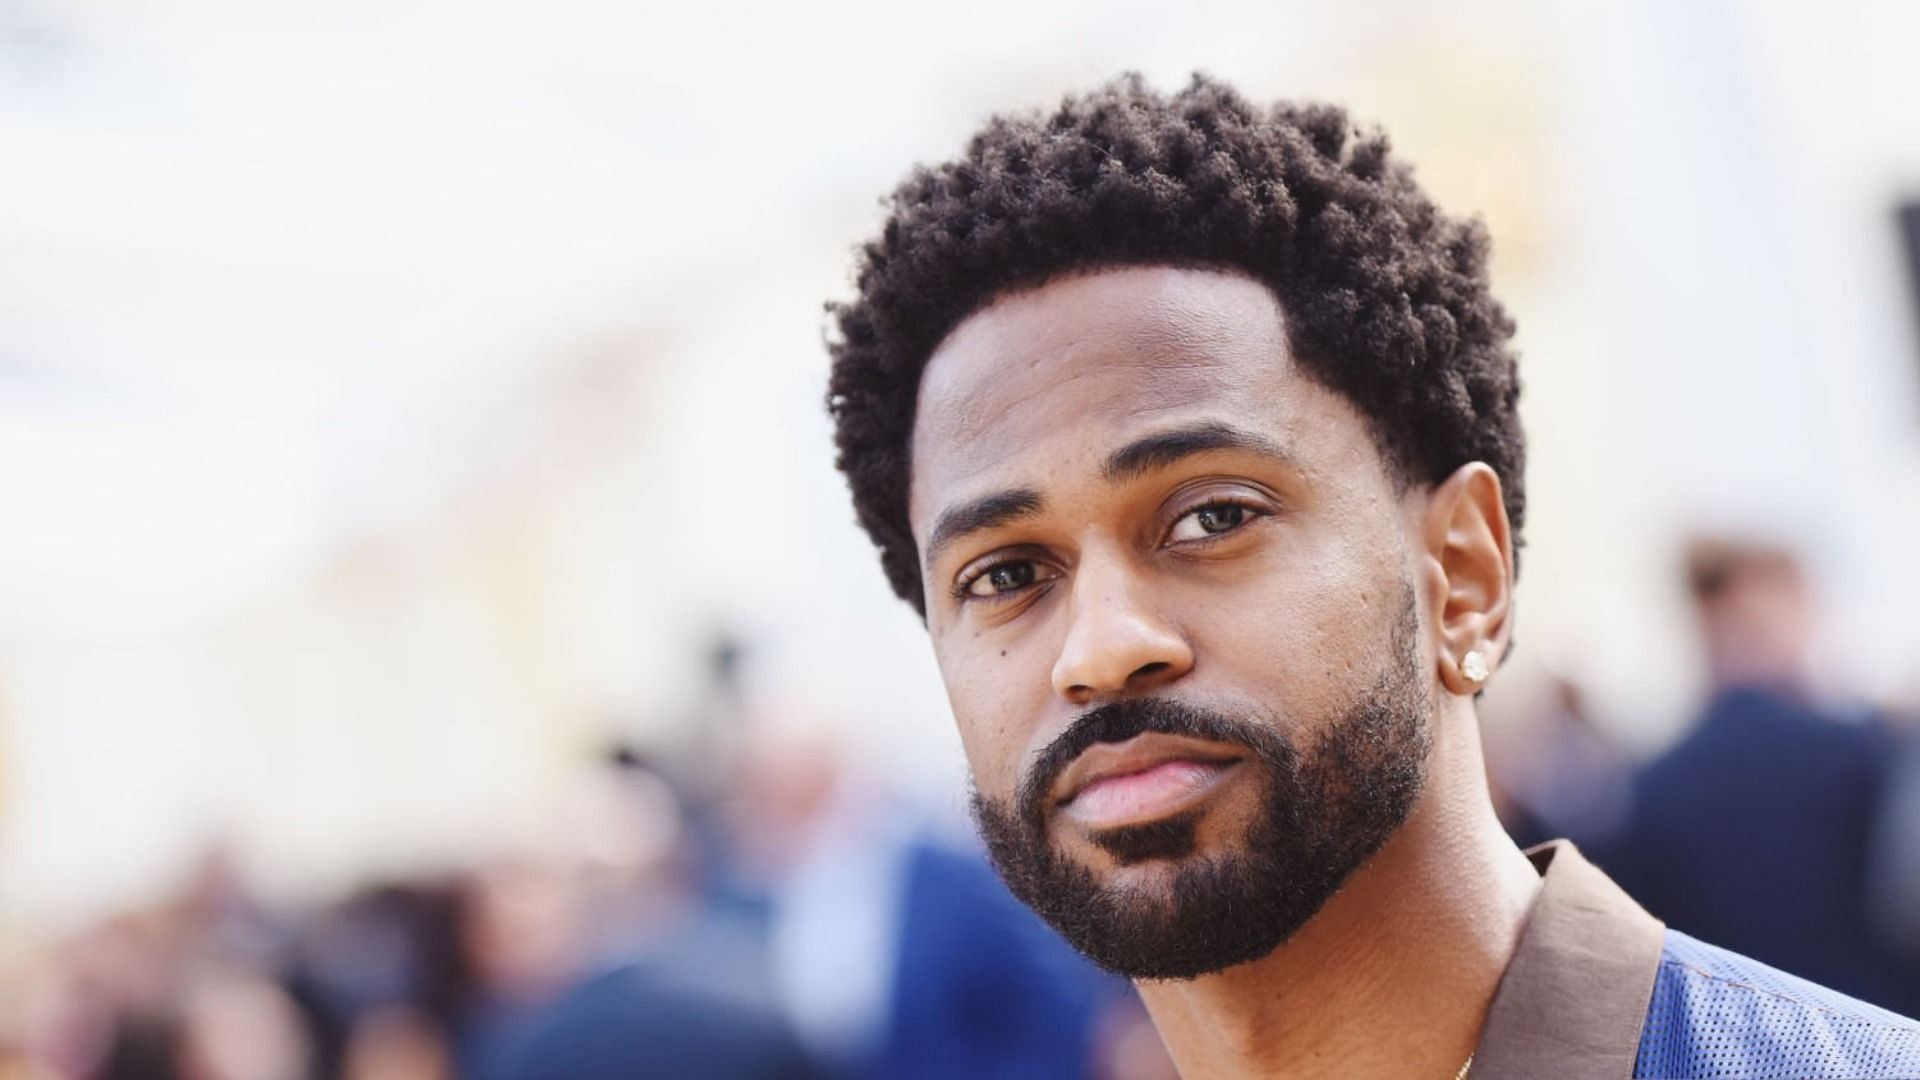 Big Sean debunked rumors of an alleged private photo of him making rounds on the internet (Image via Vivien Killilea/Getty Images)